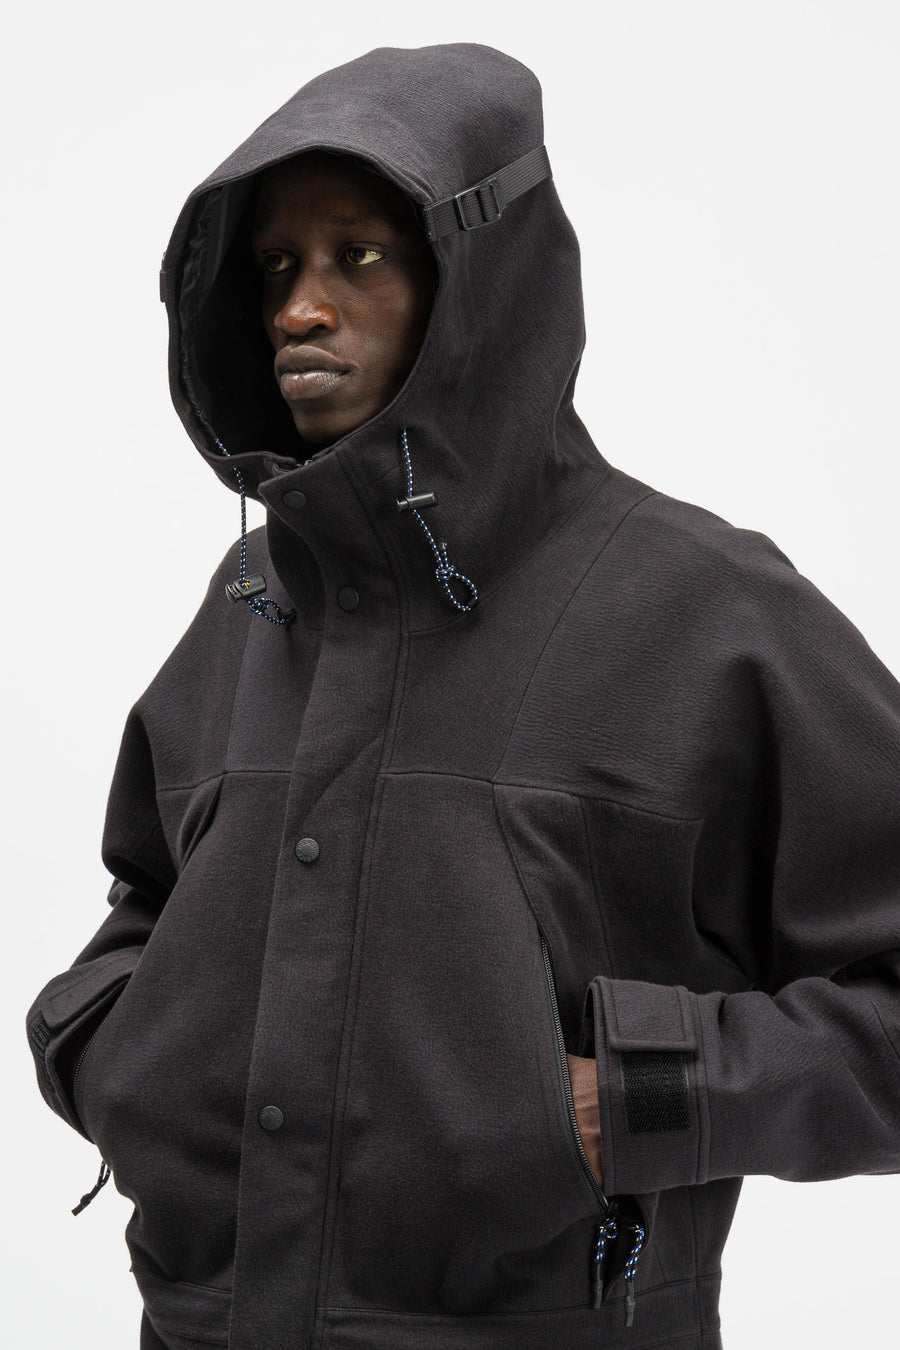 north face black label mountain jacket